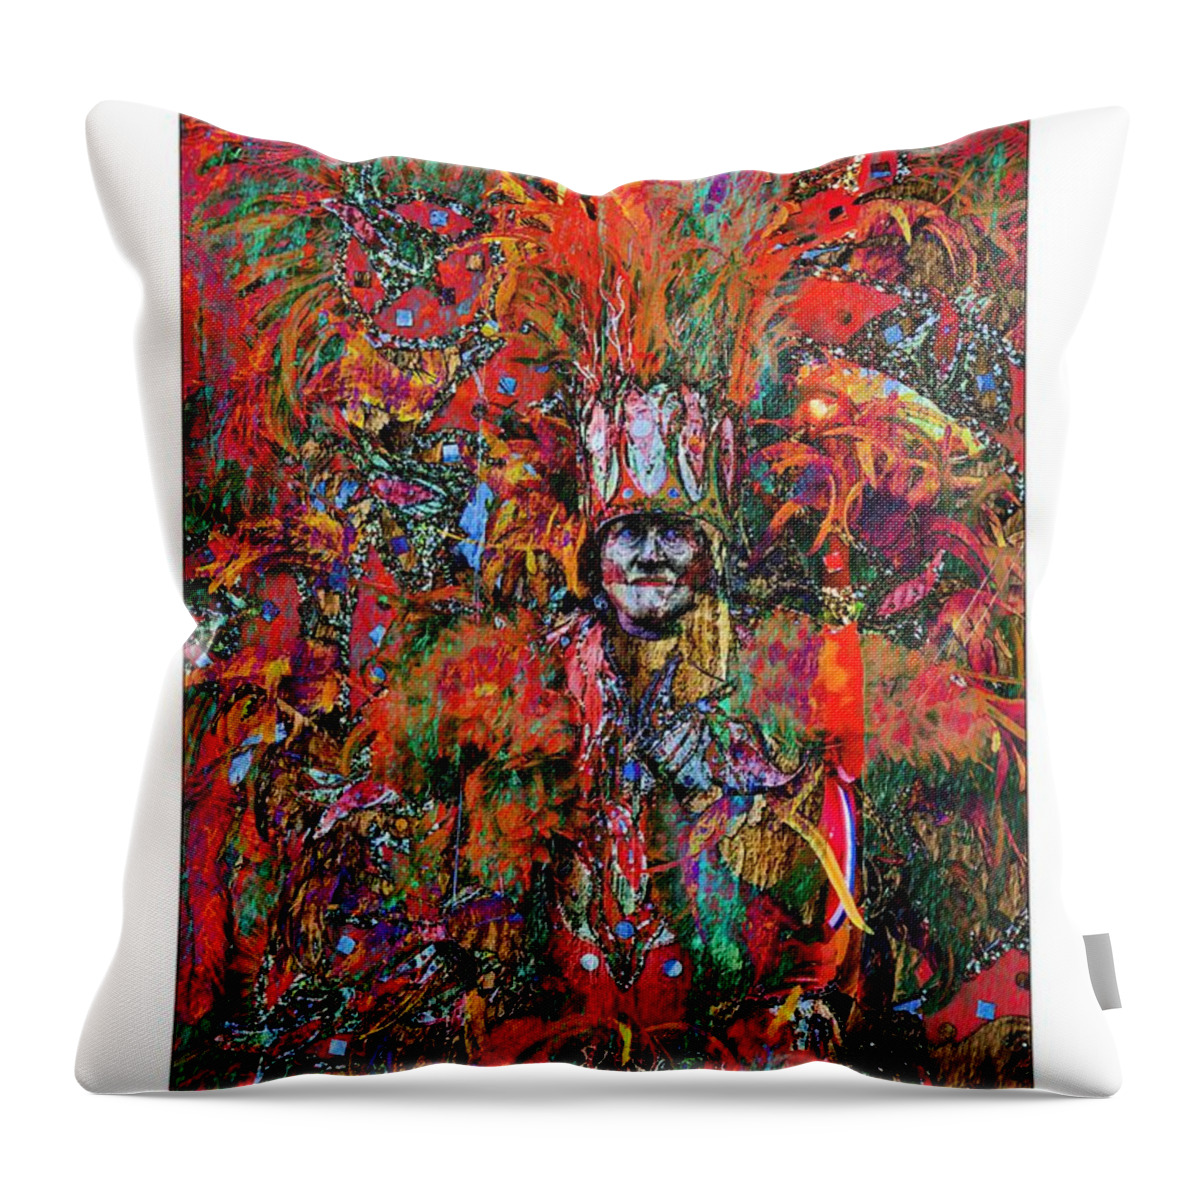 Mummer Throw Pillow featuring the photograph Abstracted Mummer by Alice Gipson